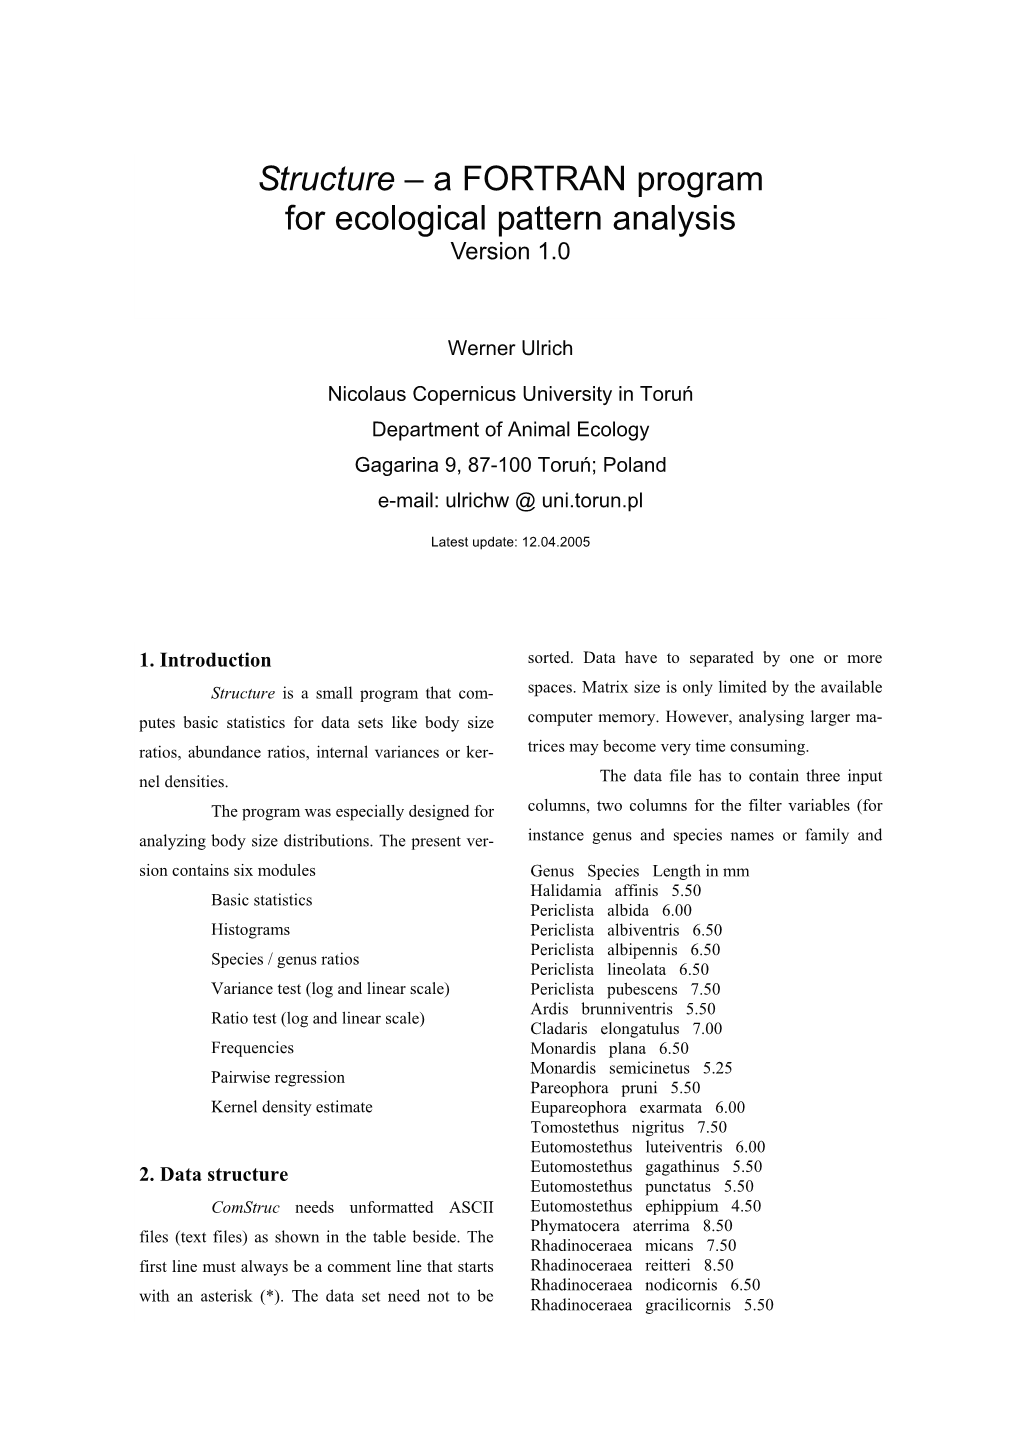 Structure – a FORTRAN Program for Ecological Pattern Analysis Version 1.0